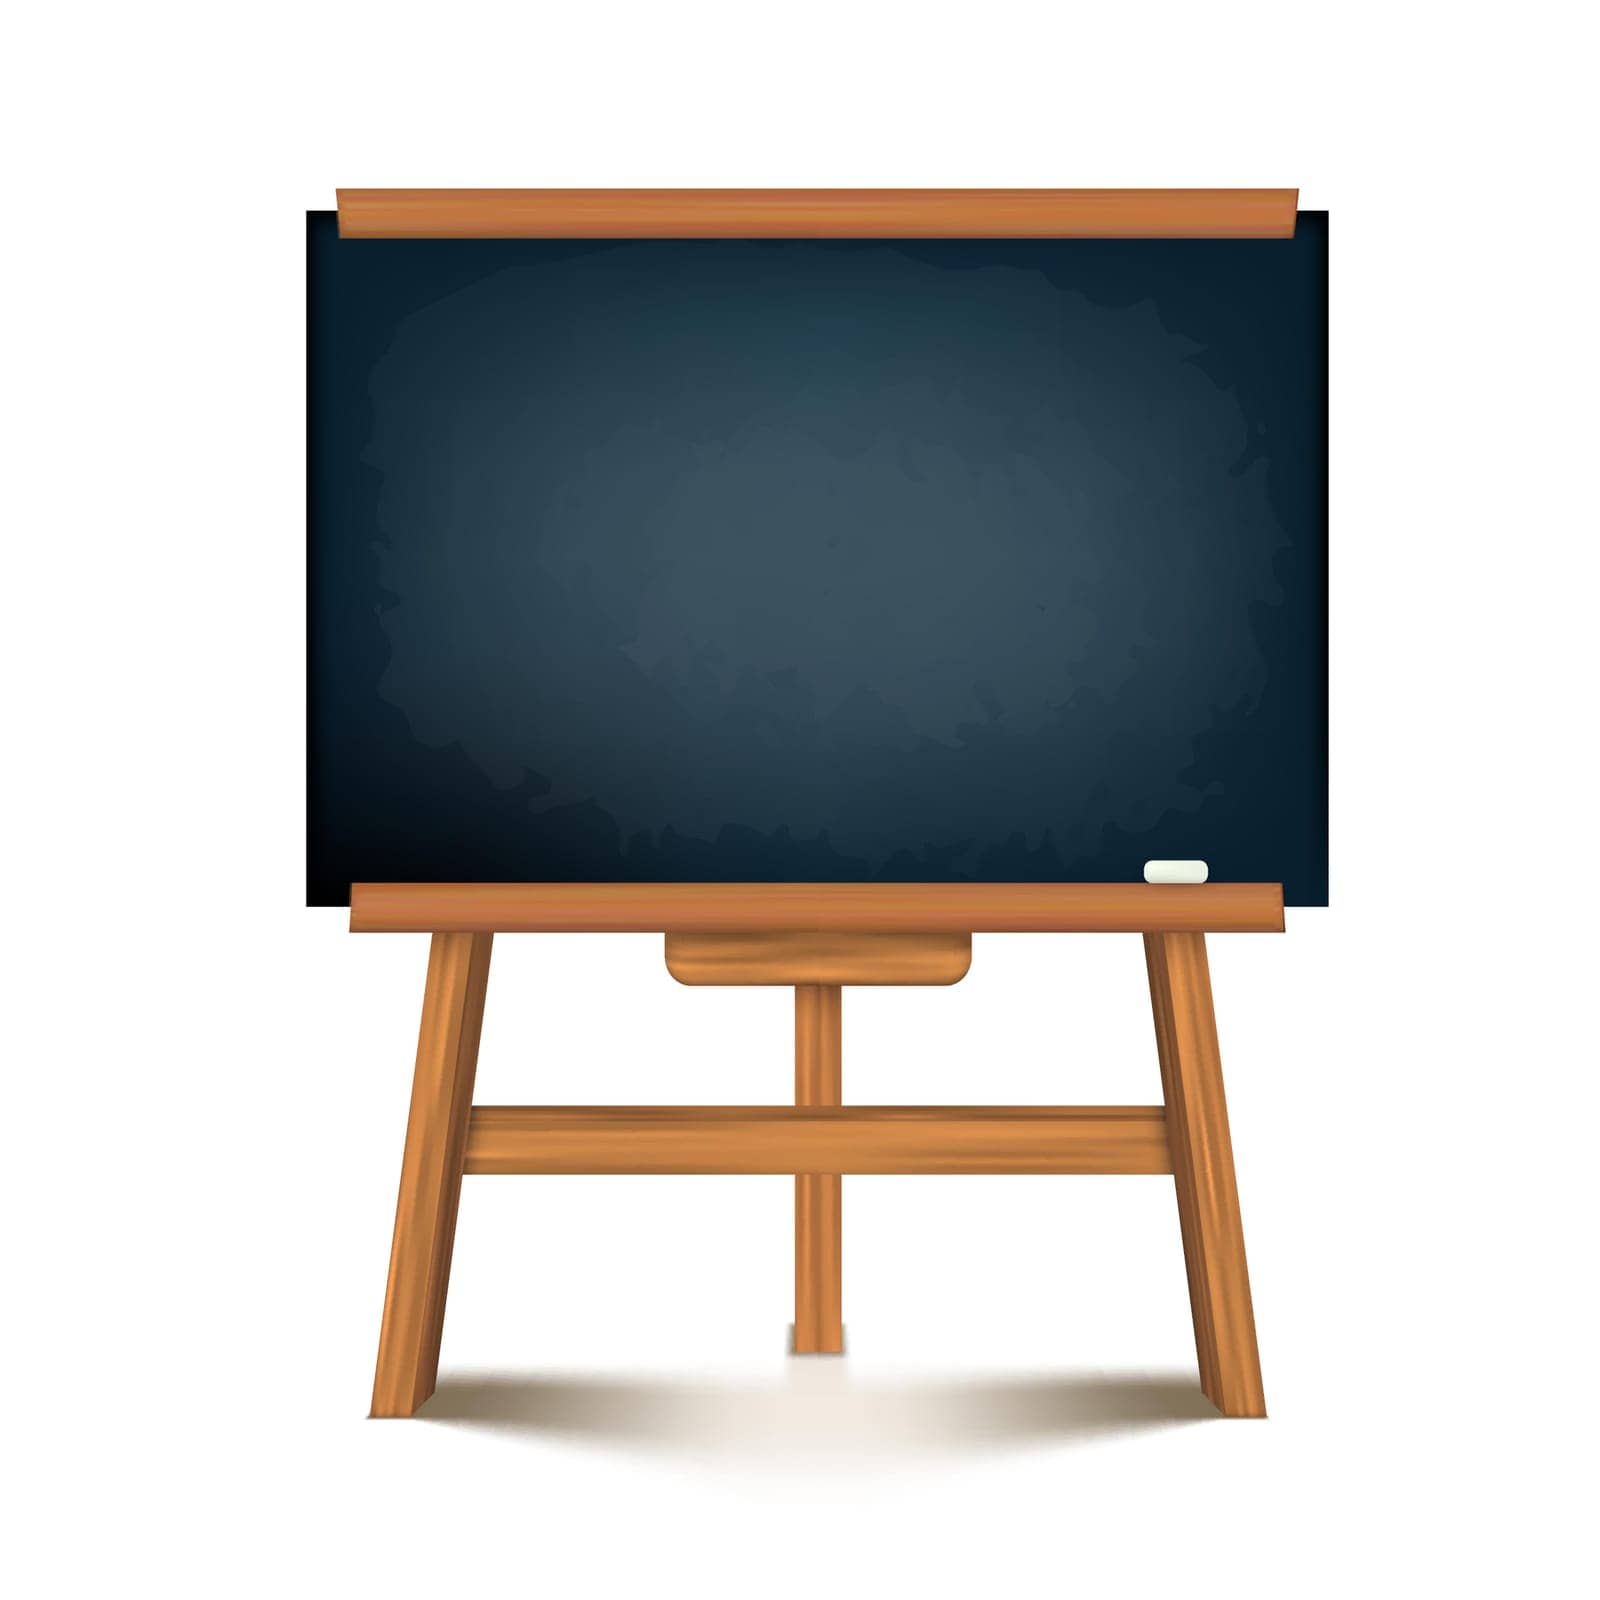 Black Board On Wall And On Stand. EPS10 Vector